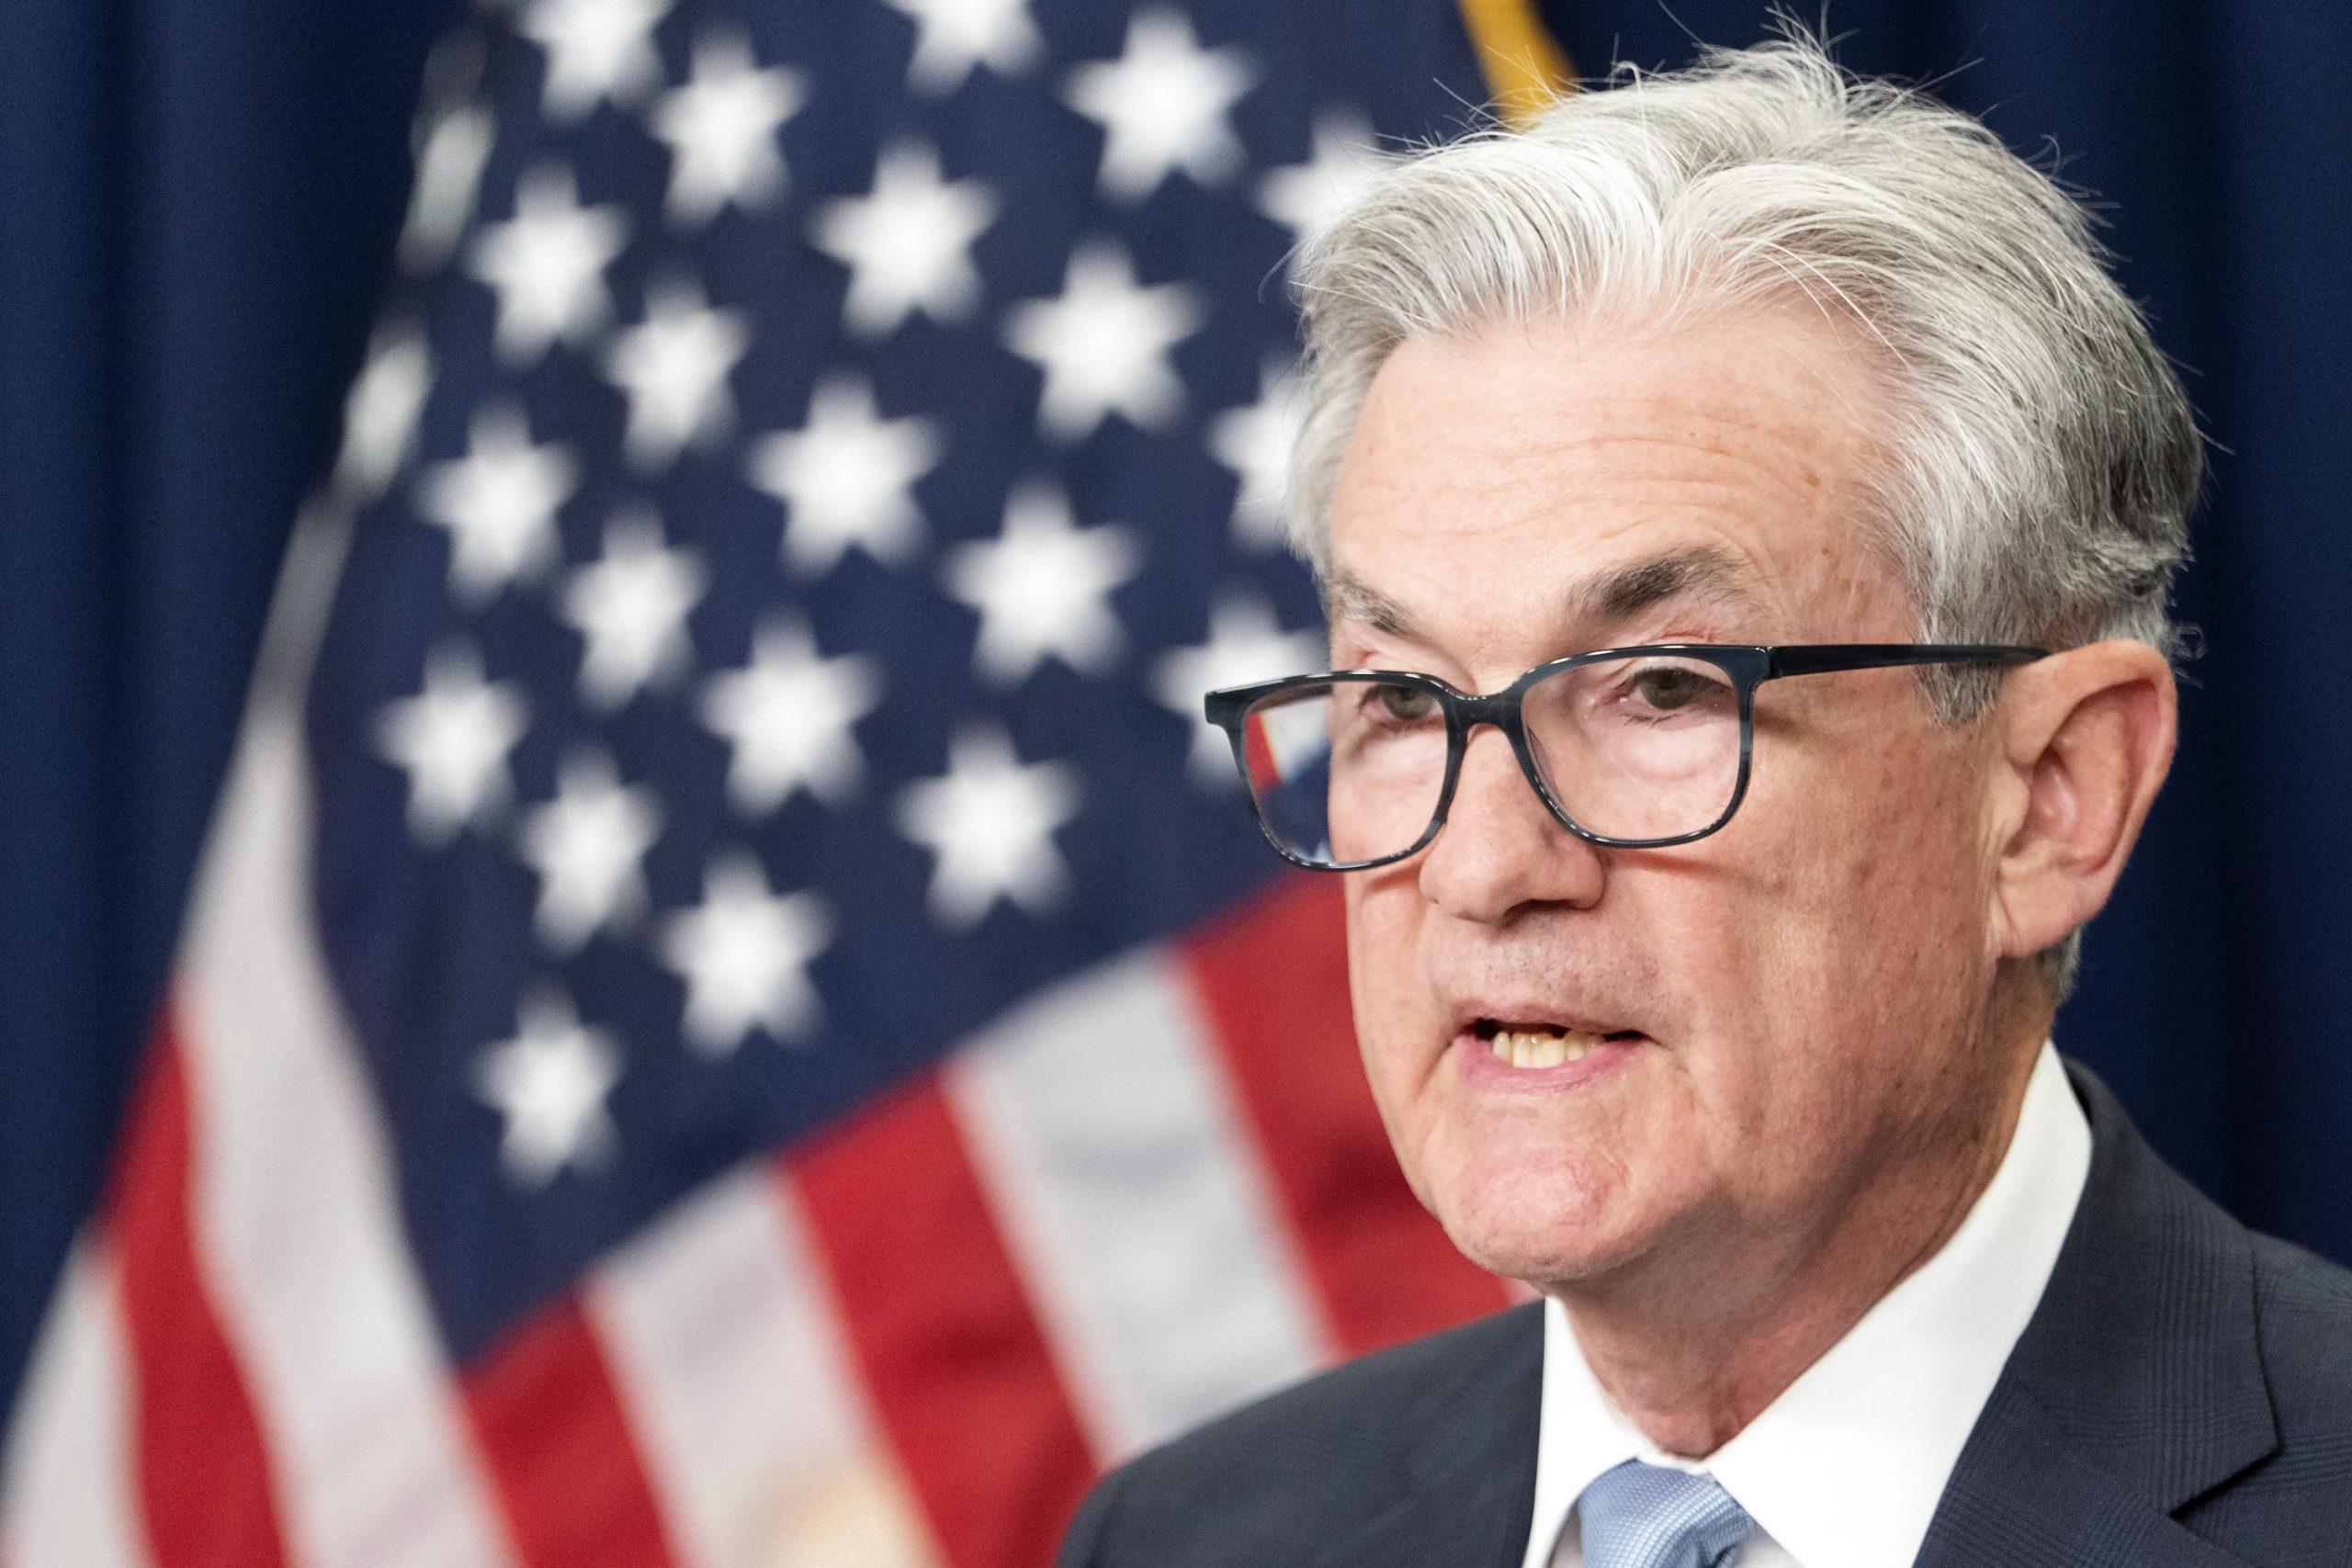 Federal Reserve of the US has raised interest rates for the first time since 1994